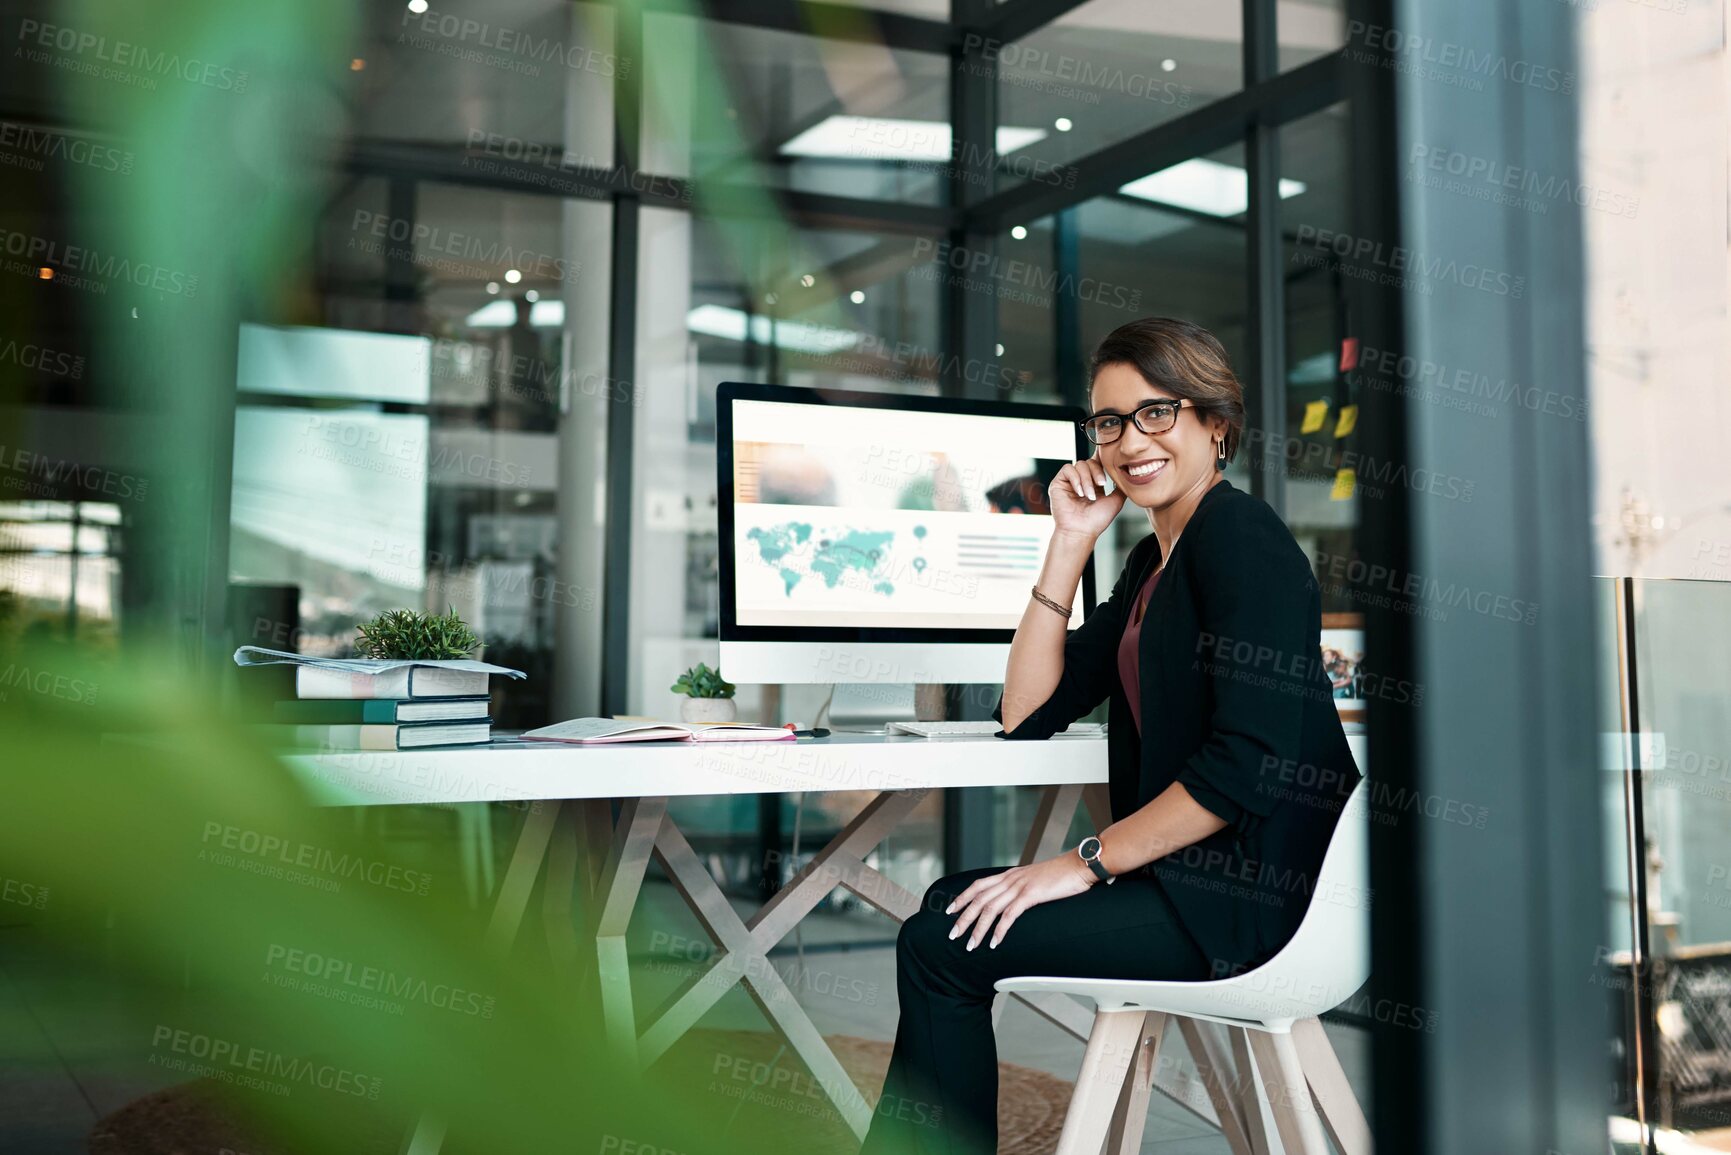 Buy stock photo Cropped portrait of an attractive young businesswoman sitting alone at her desk in her office